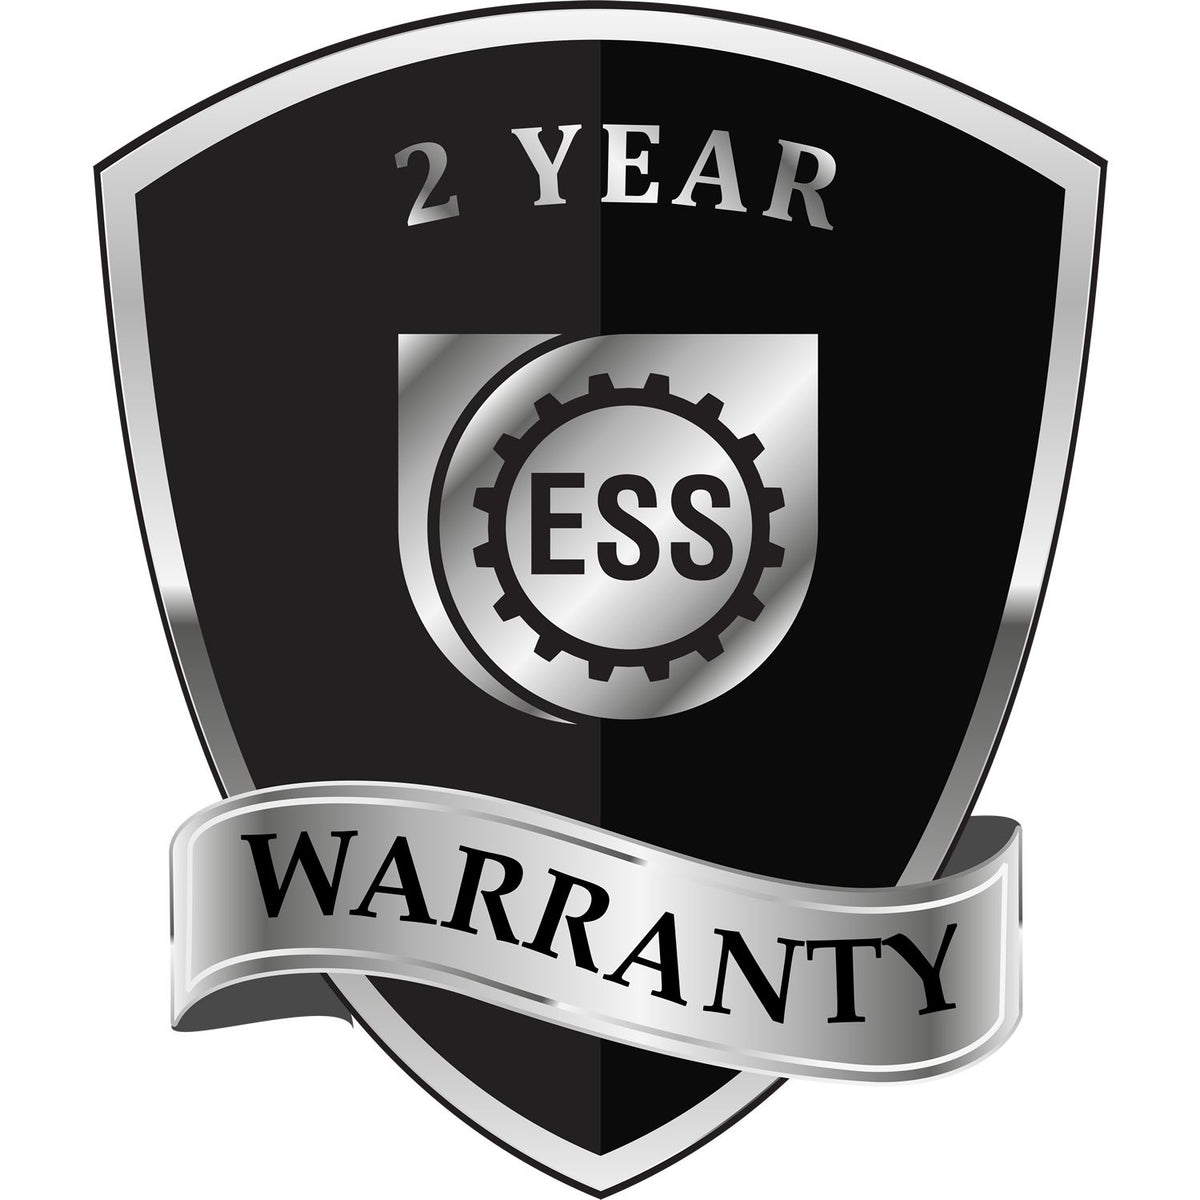 A black and silver badge or emblem showing warranty information for the Hybrid Michigan Engineer Seal